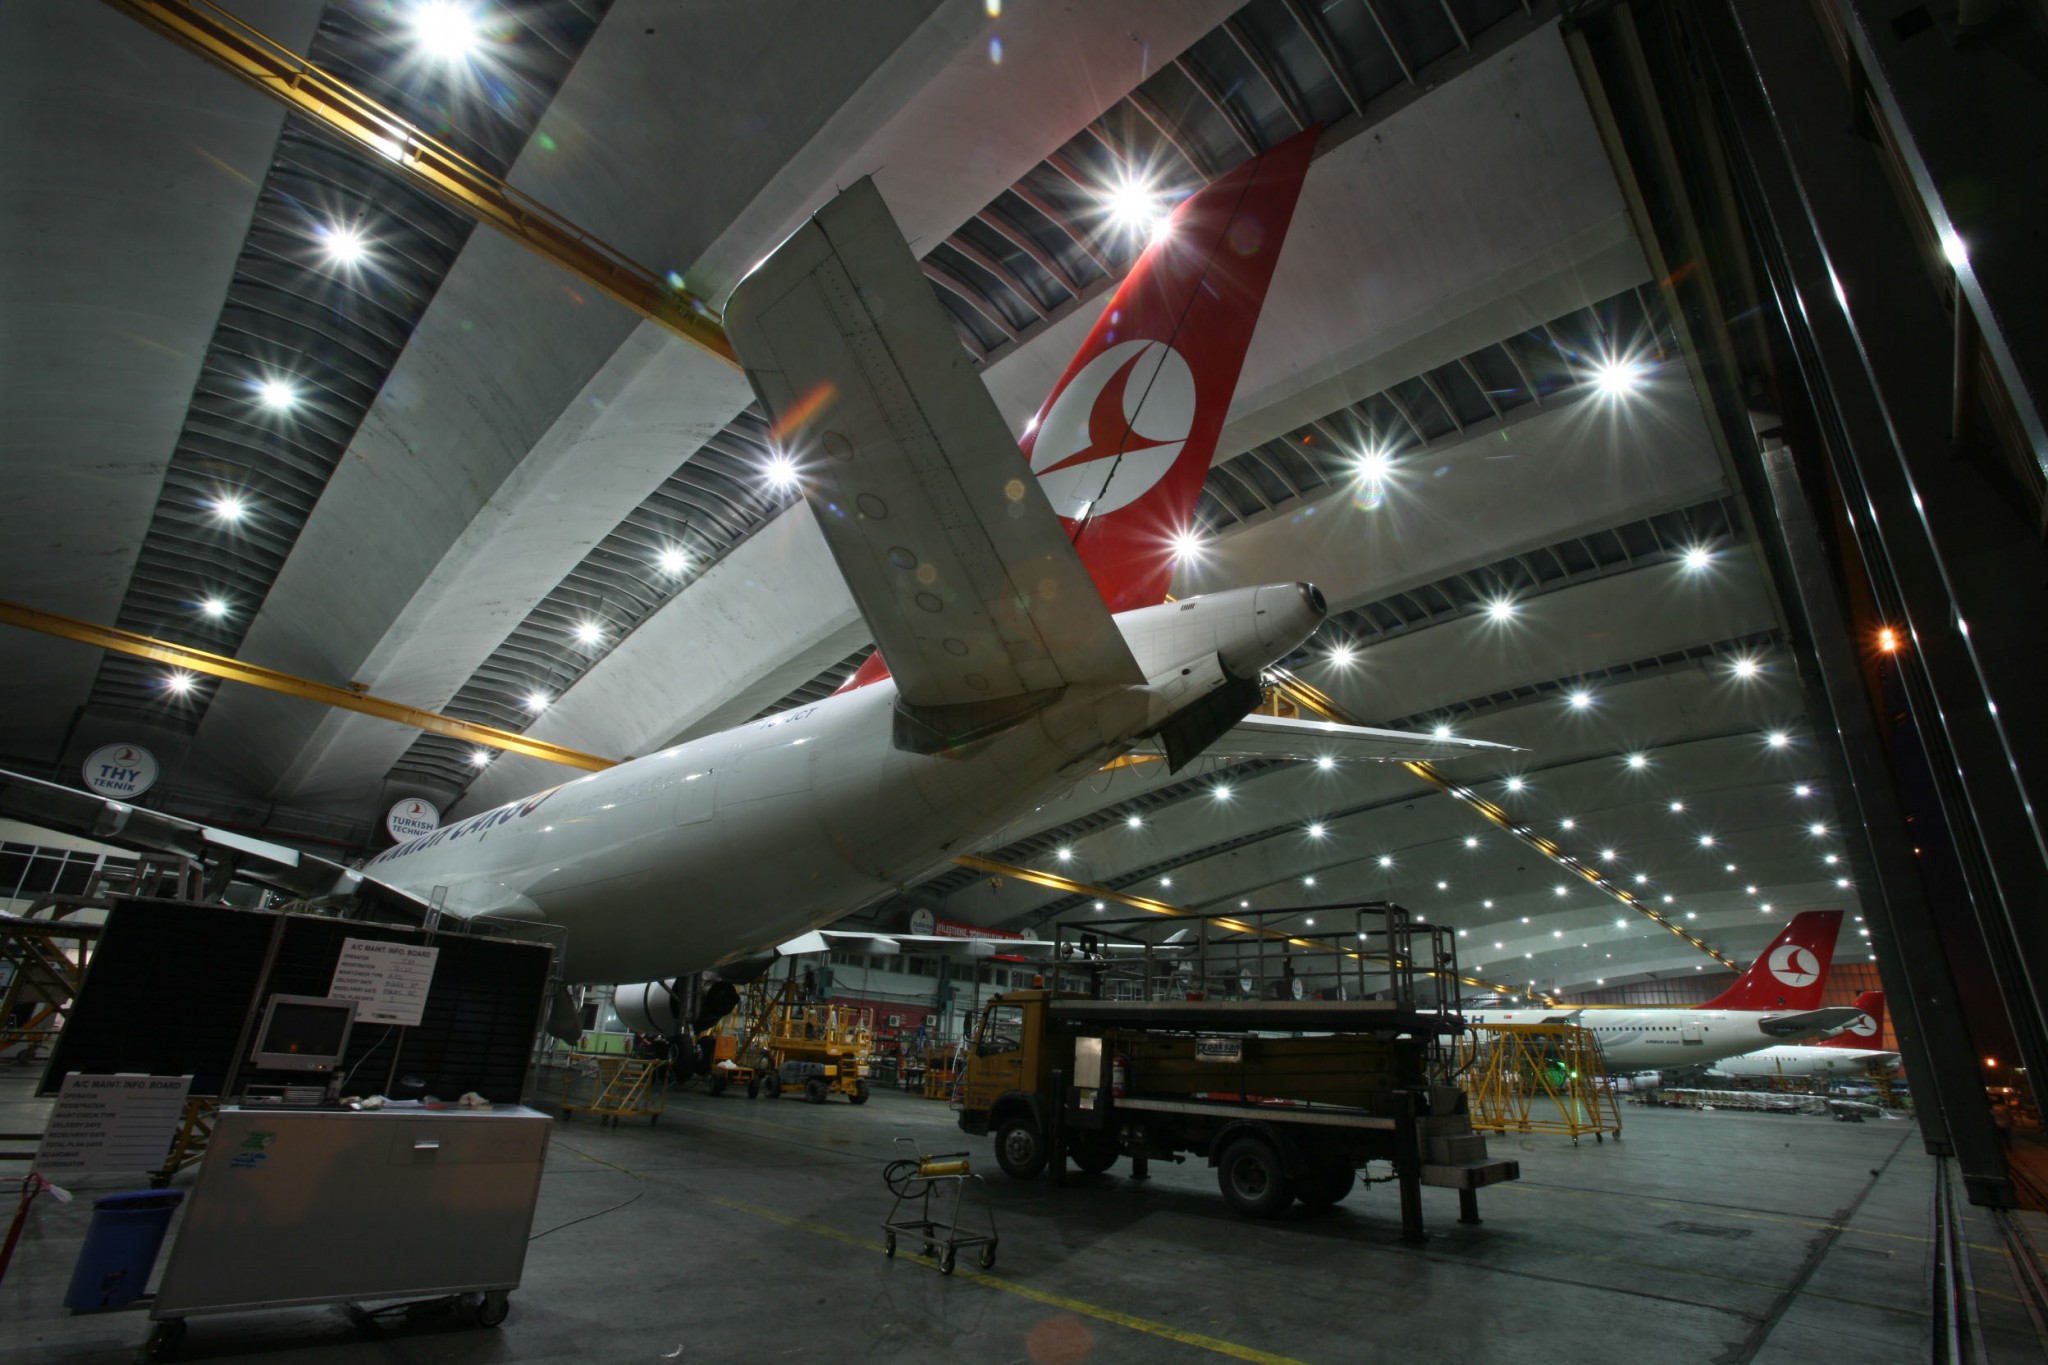 Turkish Technic wins business from UIA and NordWind